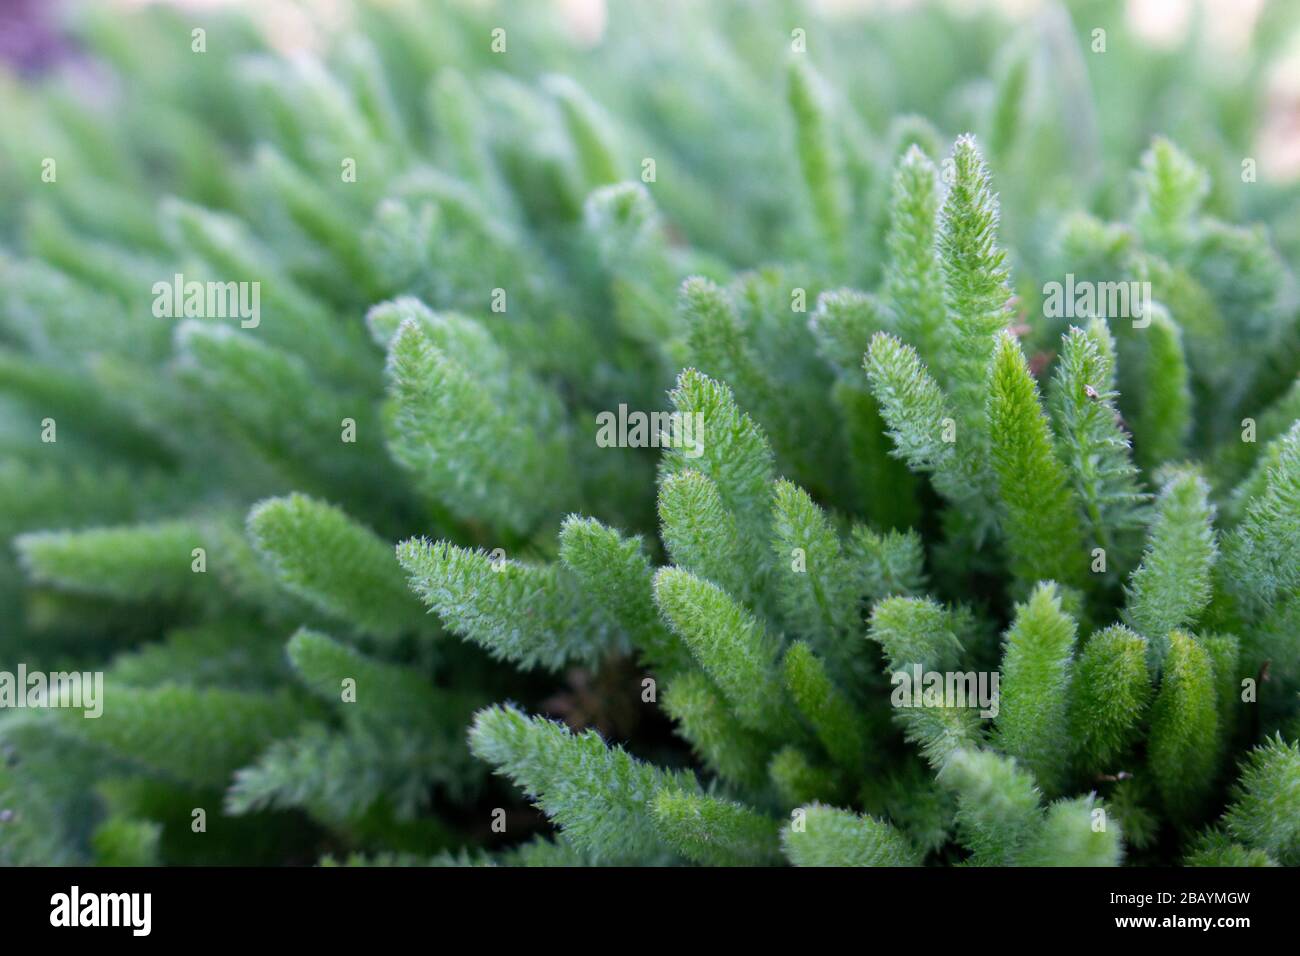 Young bush of yarrow, Achillea millefolium, medicinal plant, production of essential oil, use in liqueur products. Stock Photo